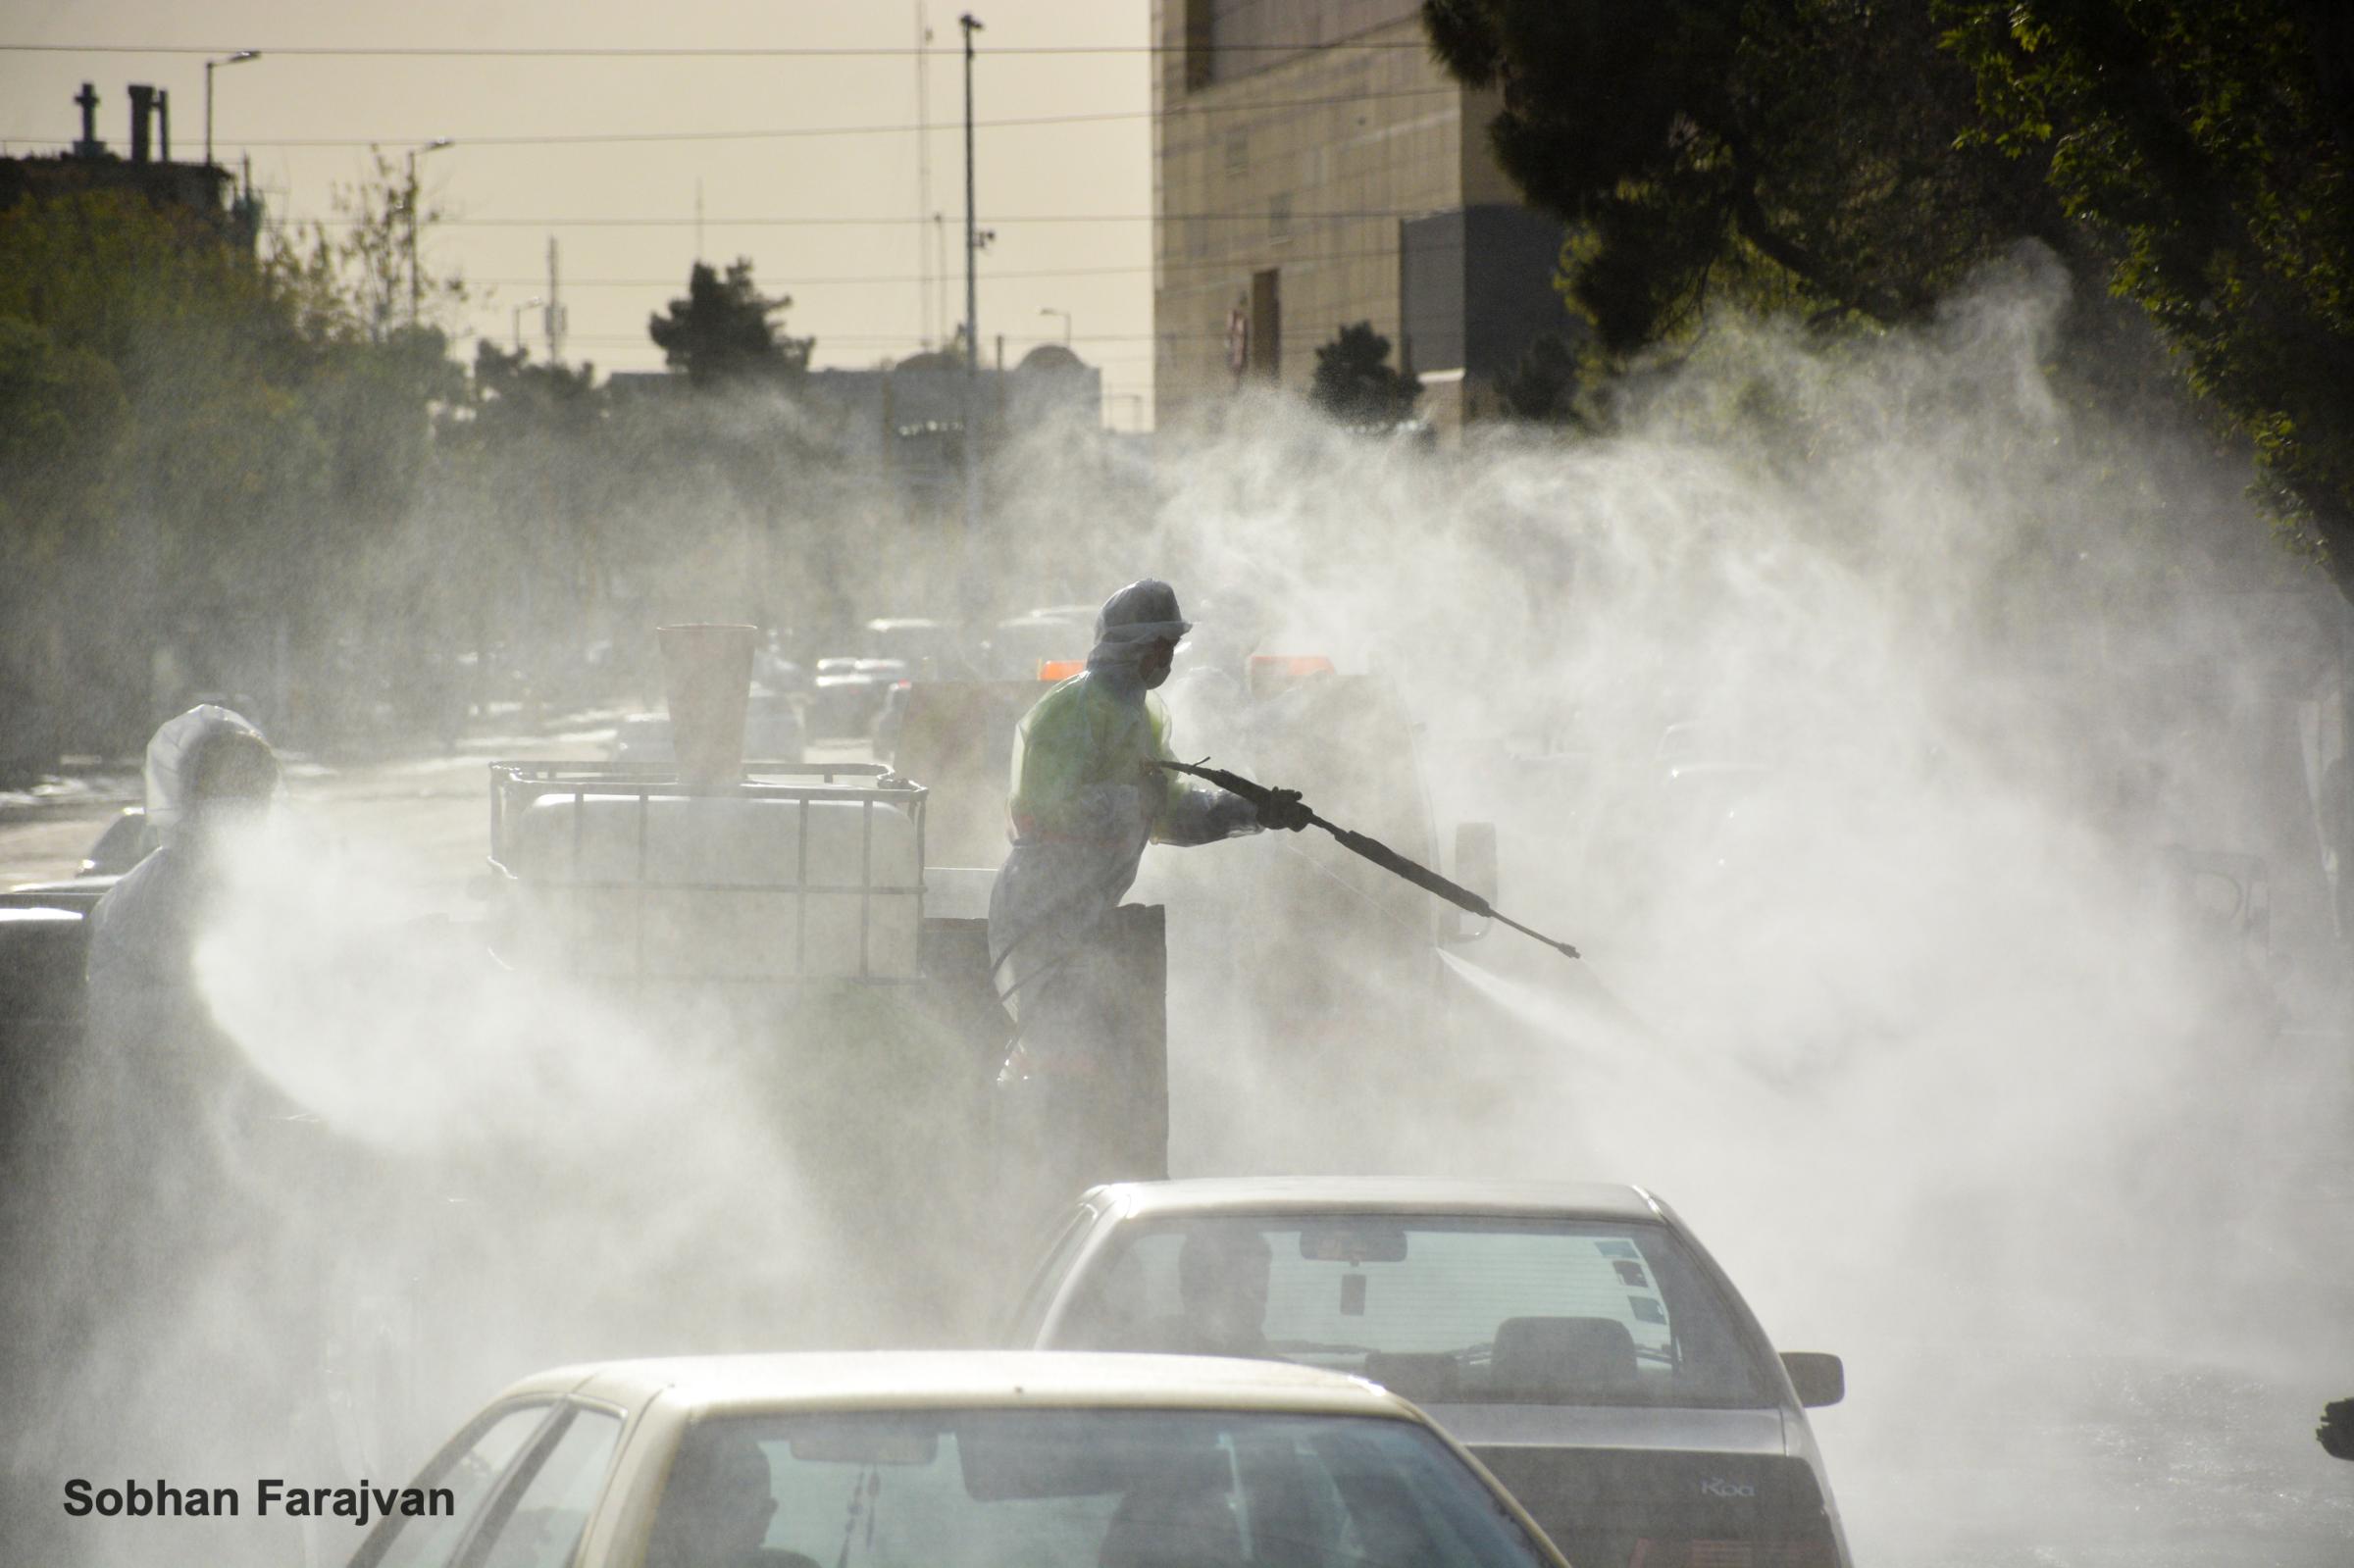 COVID-19 pandemic in Iran (2020-2022) - A Tehran municipality staff disinfects streets against...